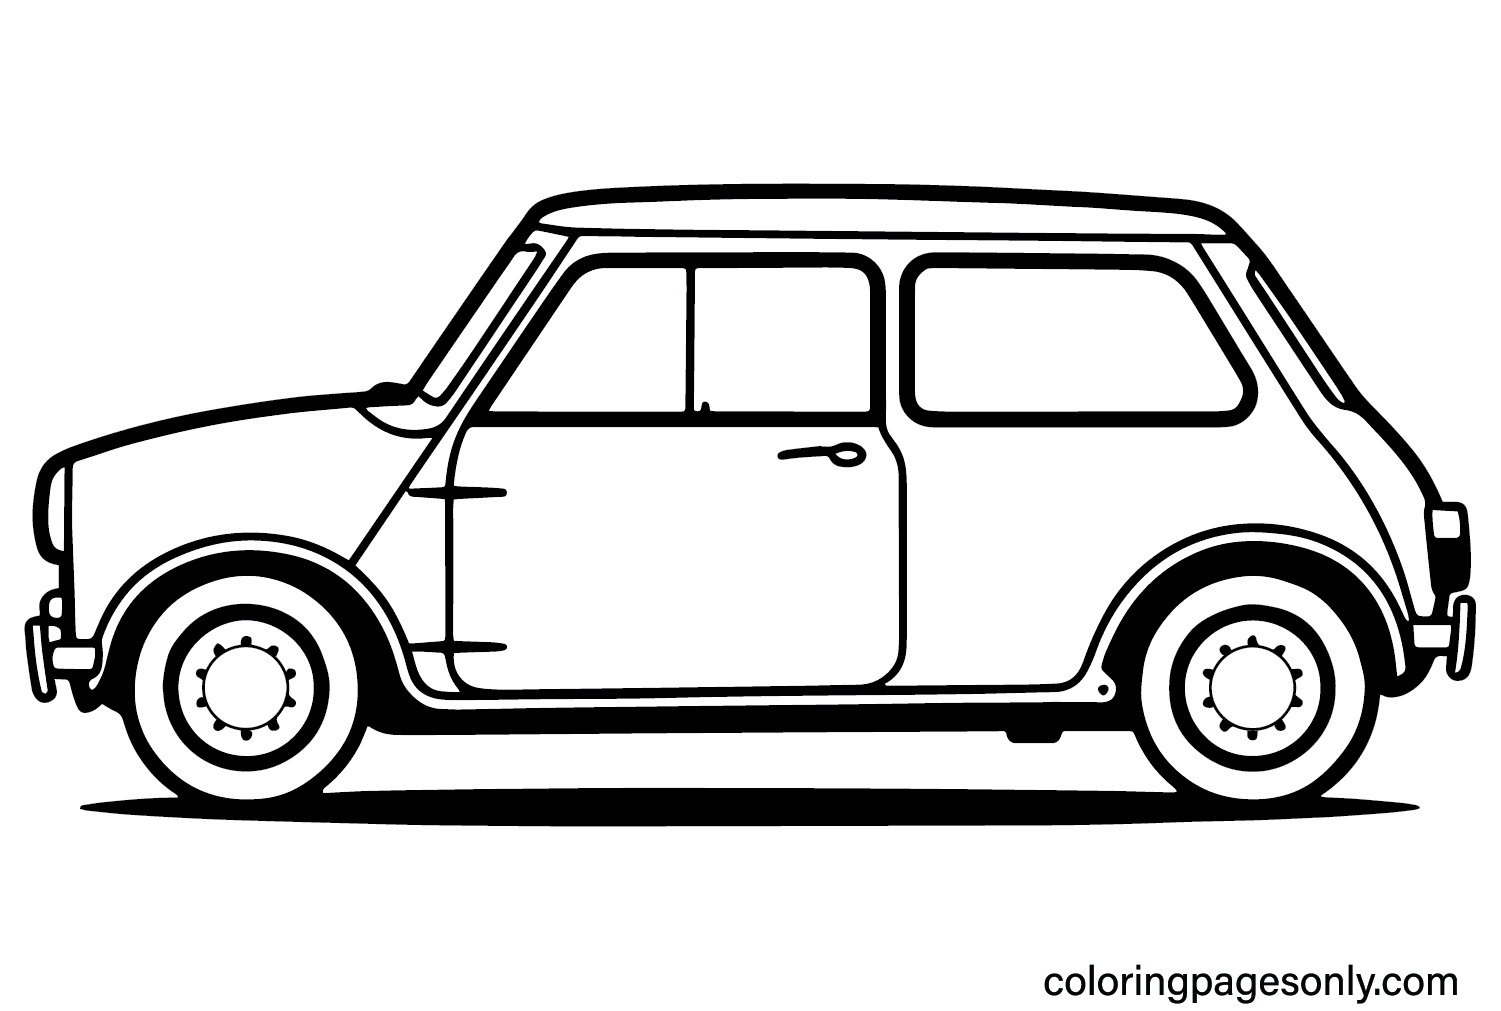 Mini Cooper Images to Color